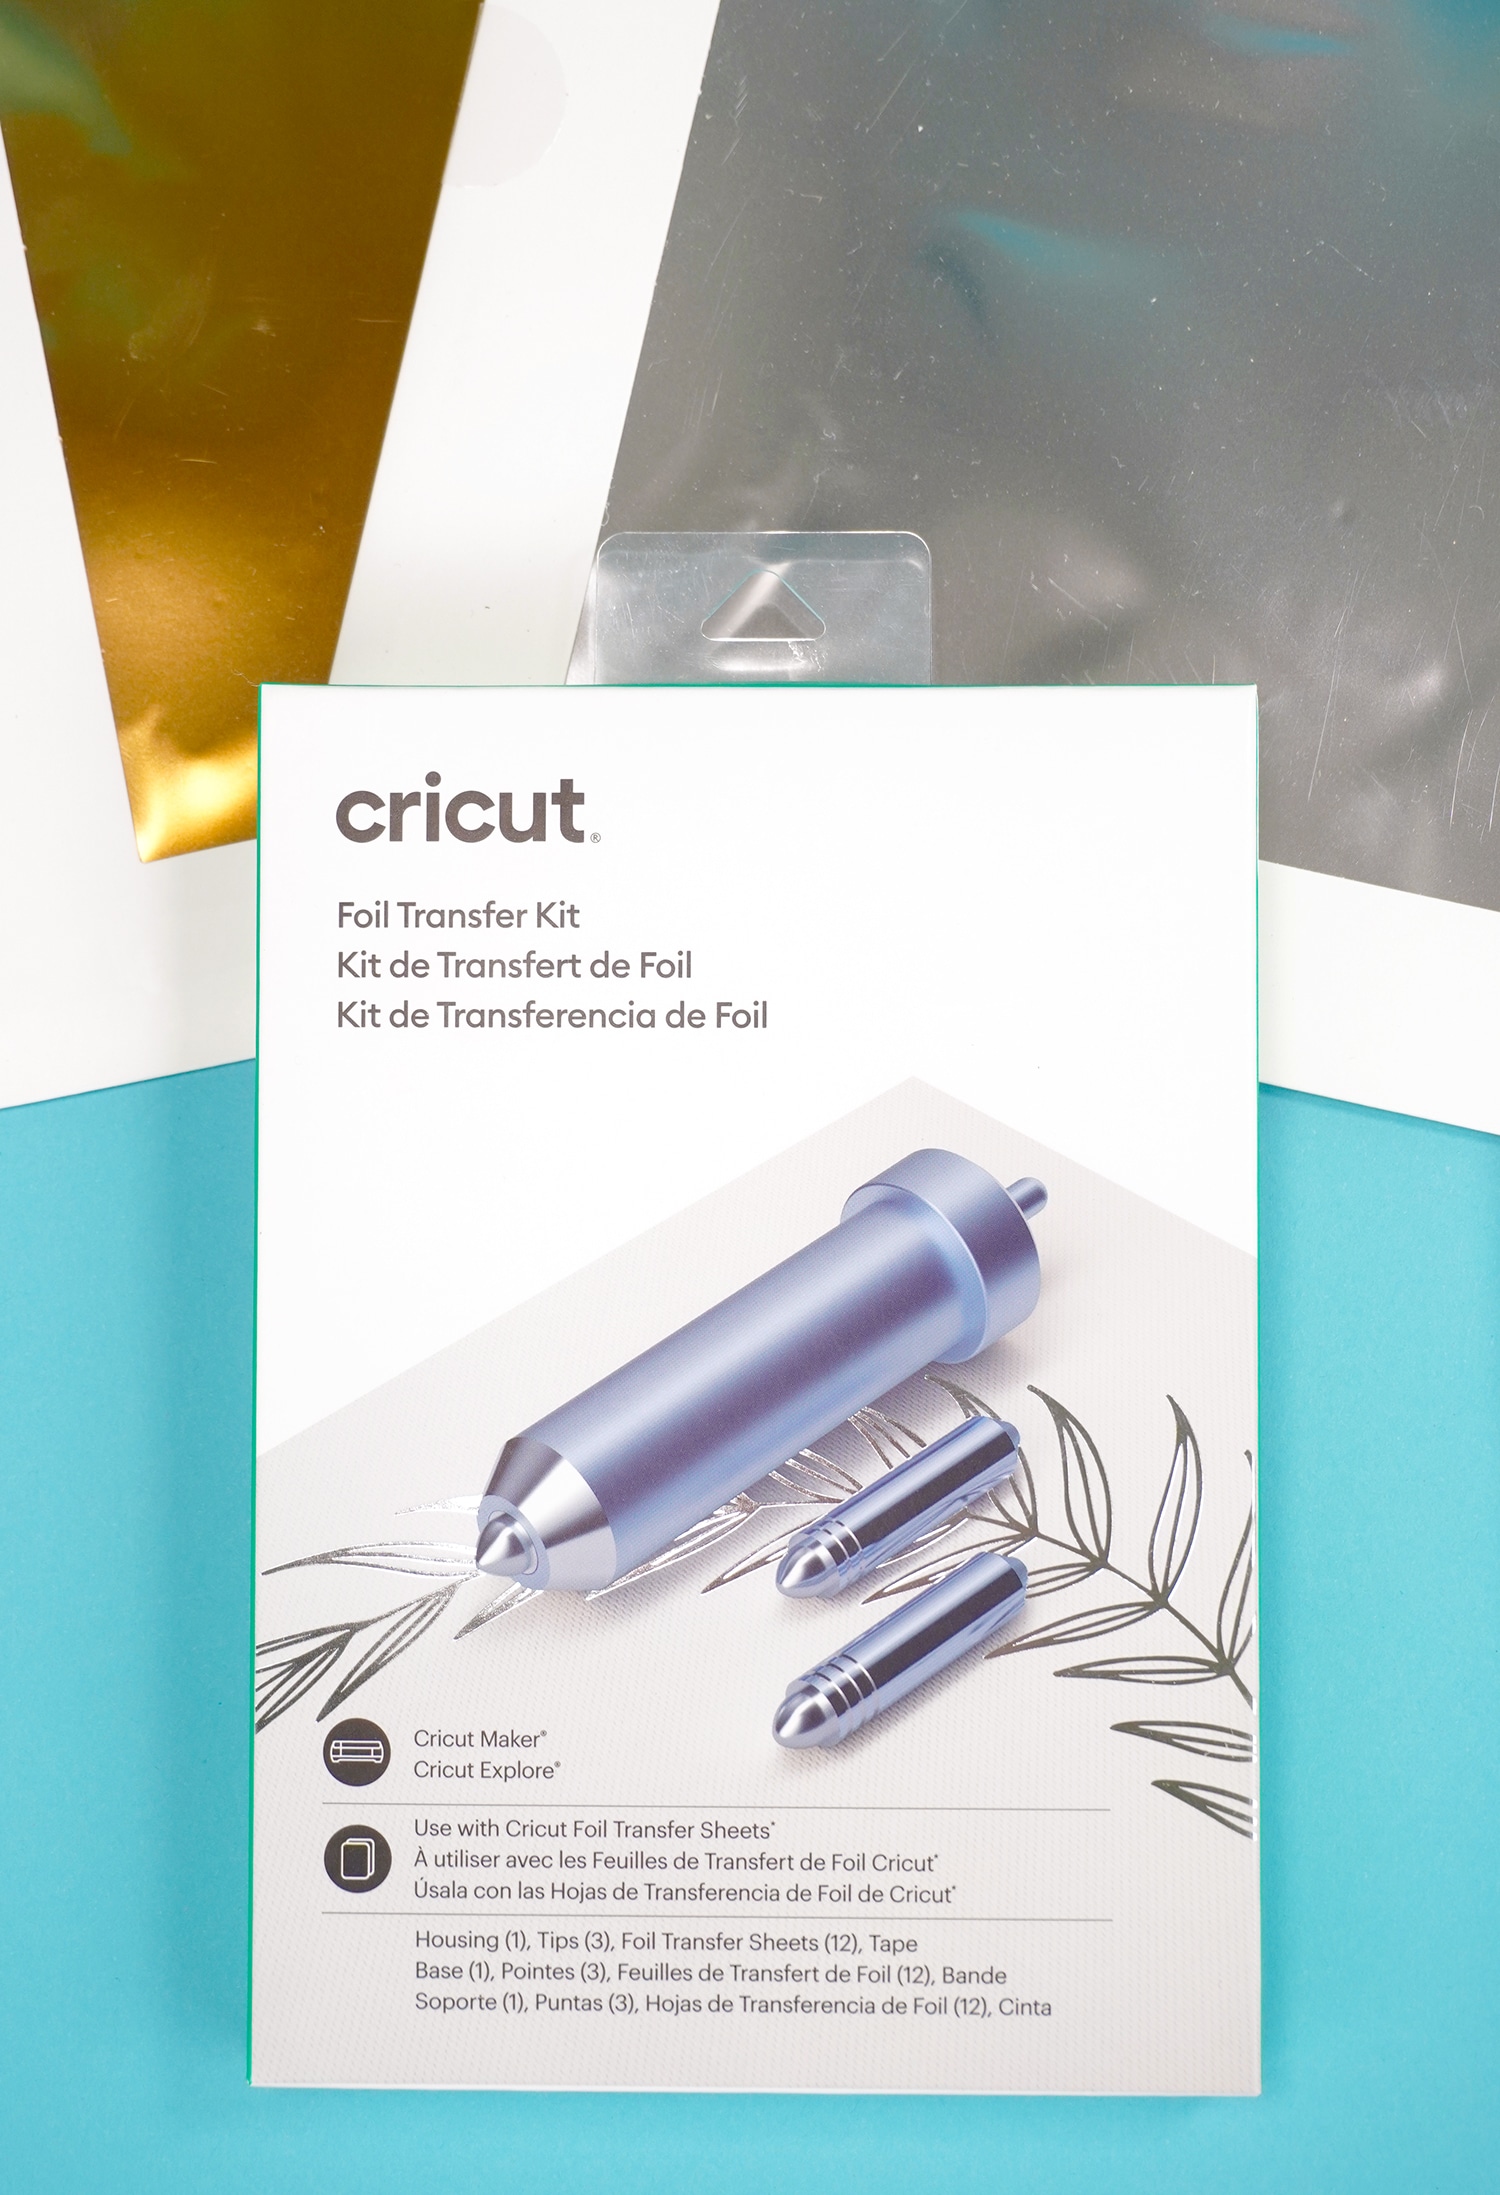 Everything You Need To Know About The Cricut Foil Transfer Kit +